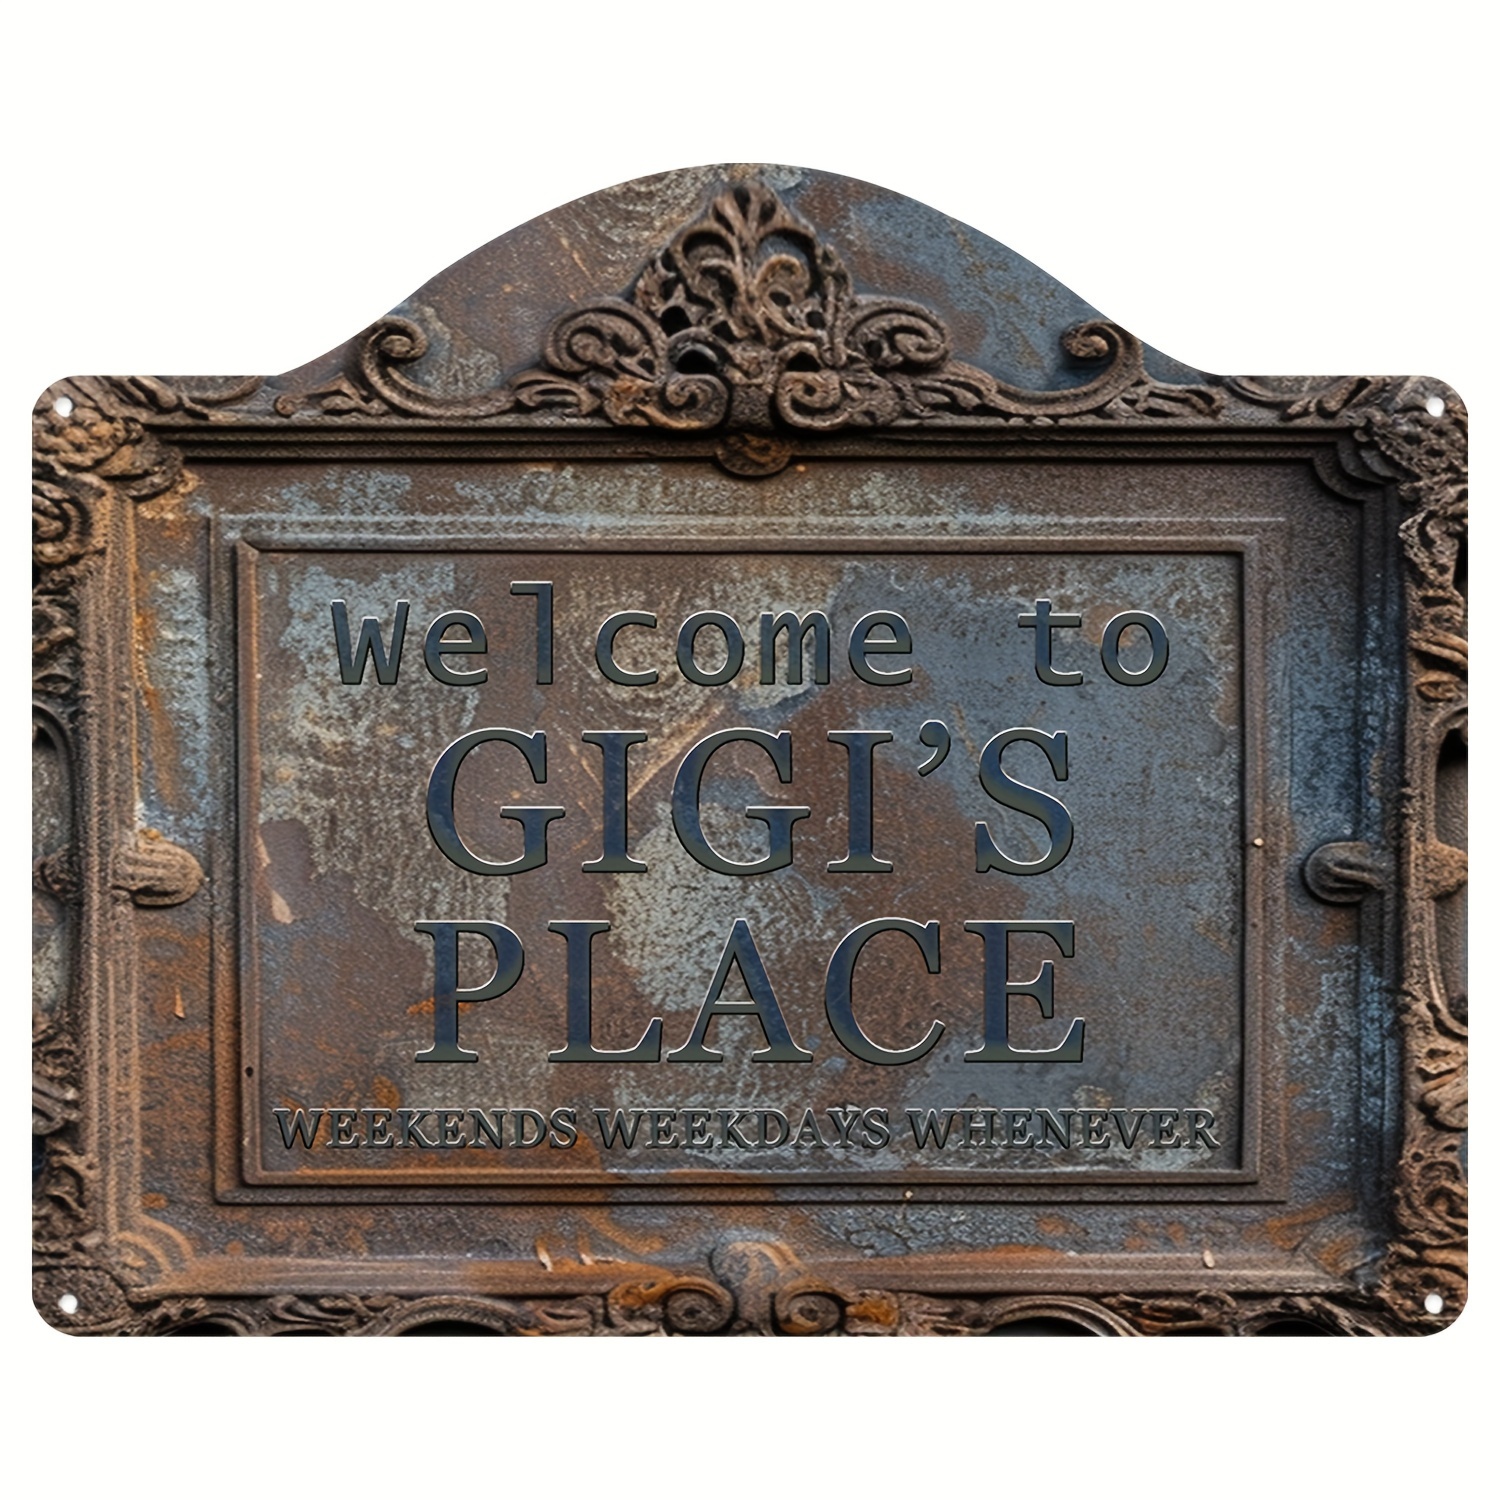 

Vintage Aluminum Decorative Sign "welcome To Gigi's Place" - Multipurpose Wall Hanging Plaque For Home, Office, Farmhouse, Bathroom, Bar, Garden Decor (11.8" X 9.8")